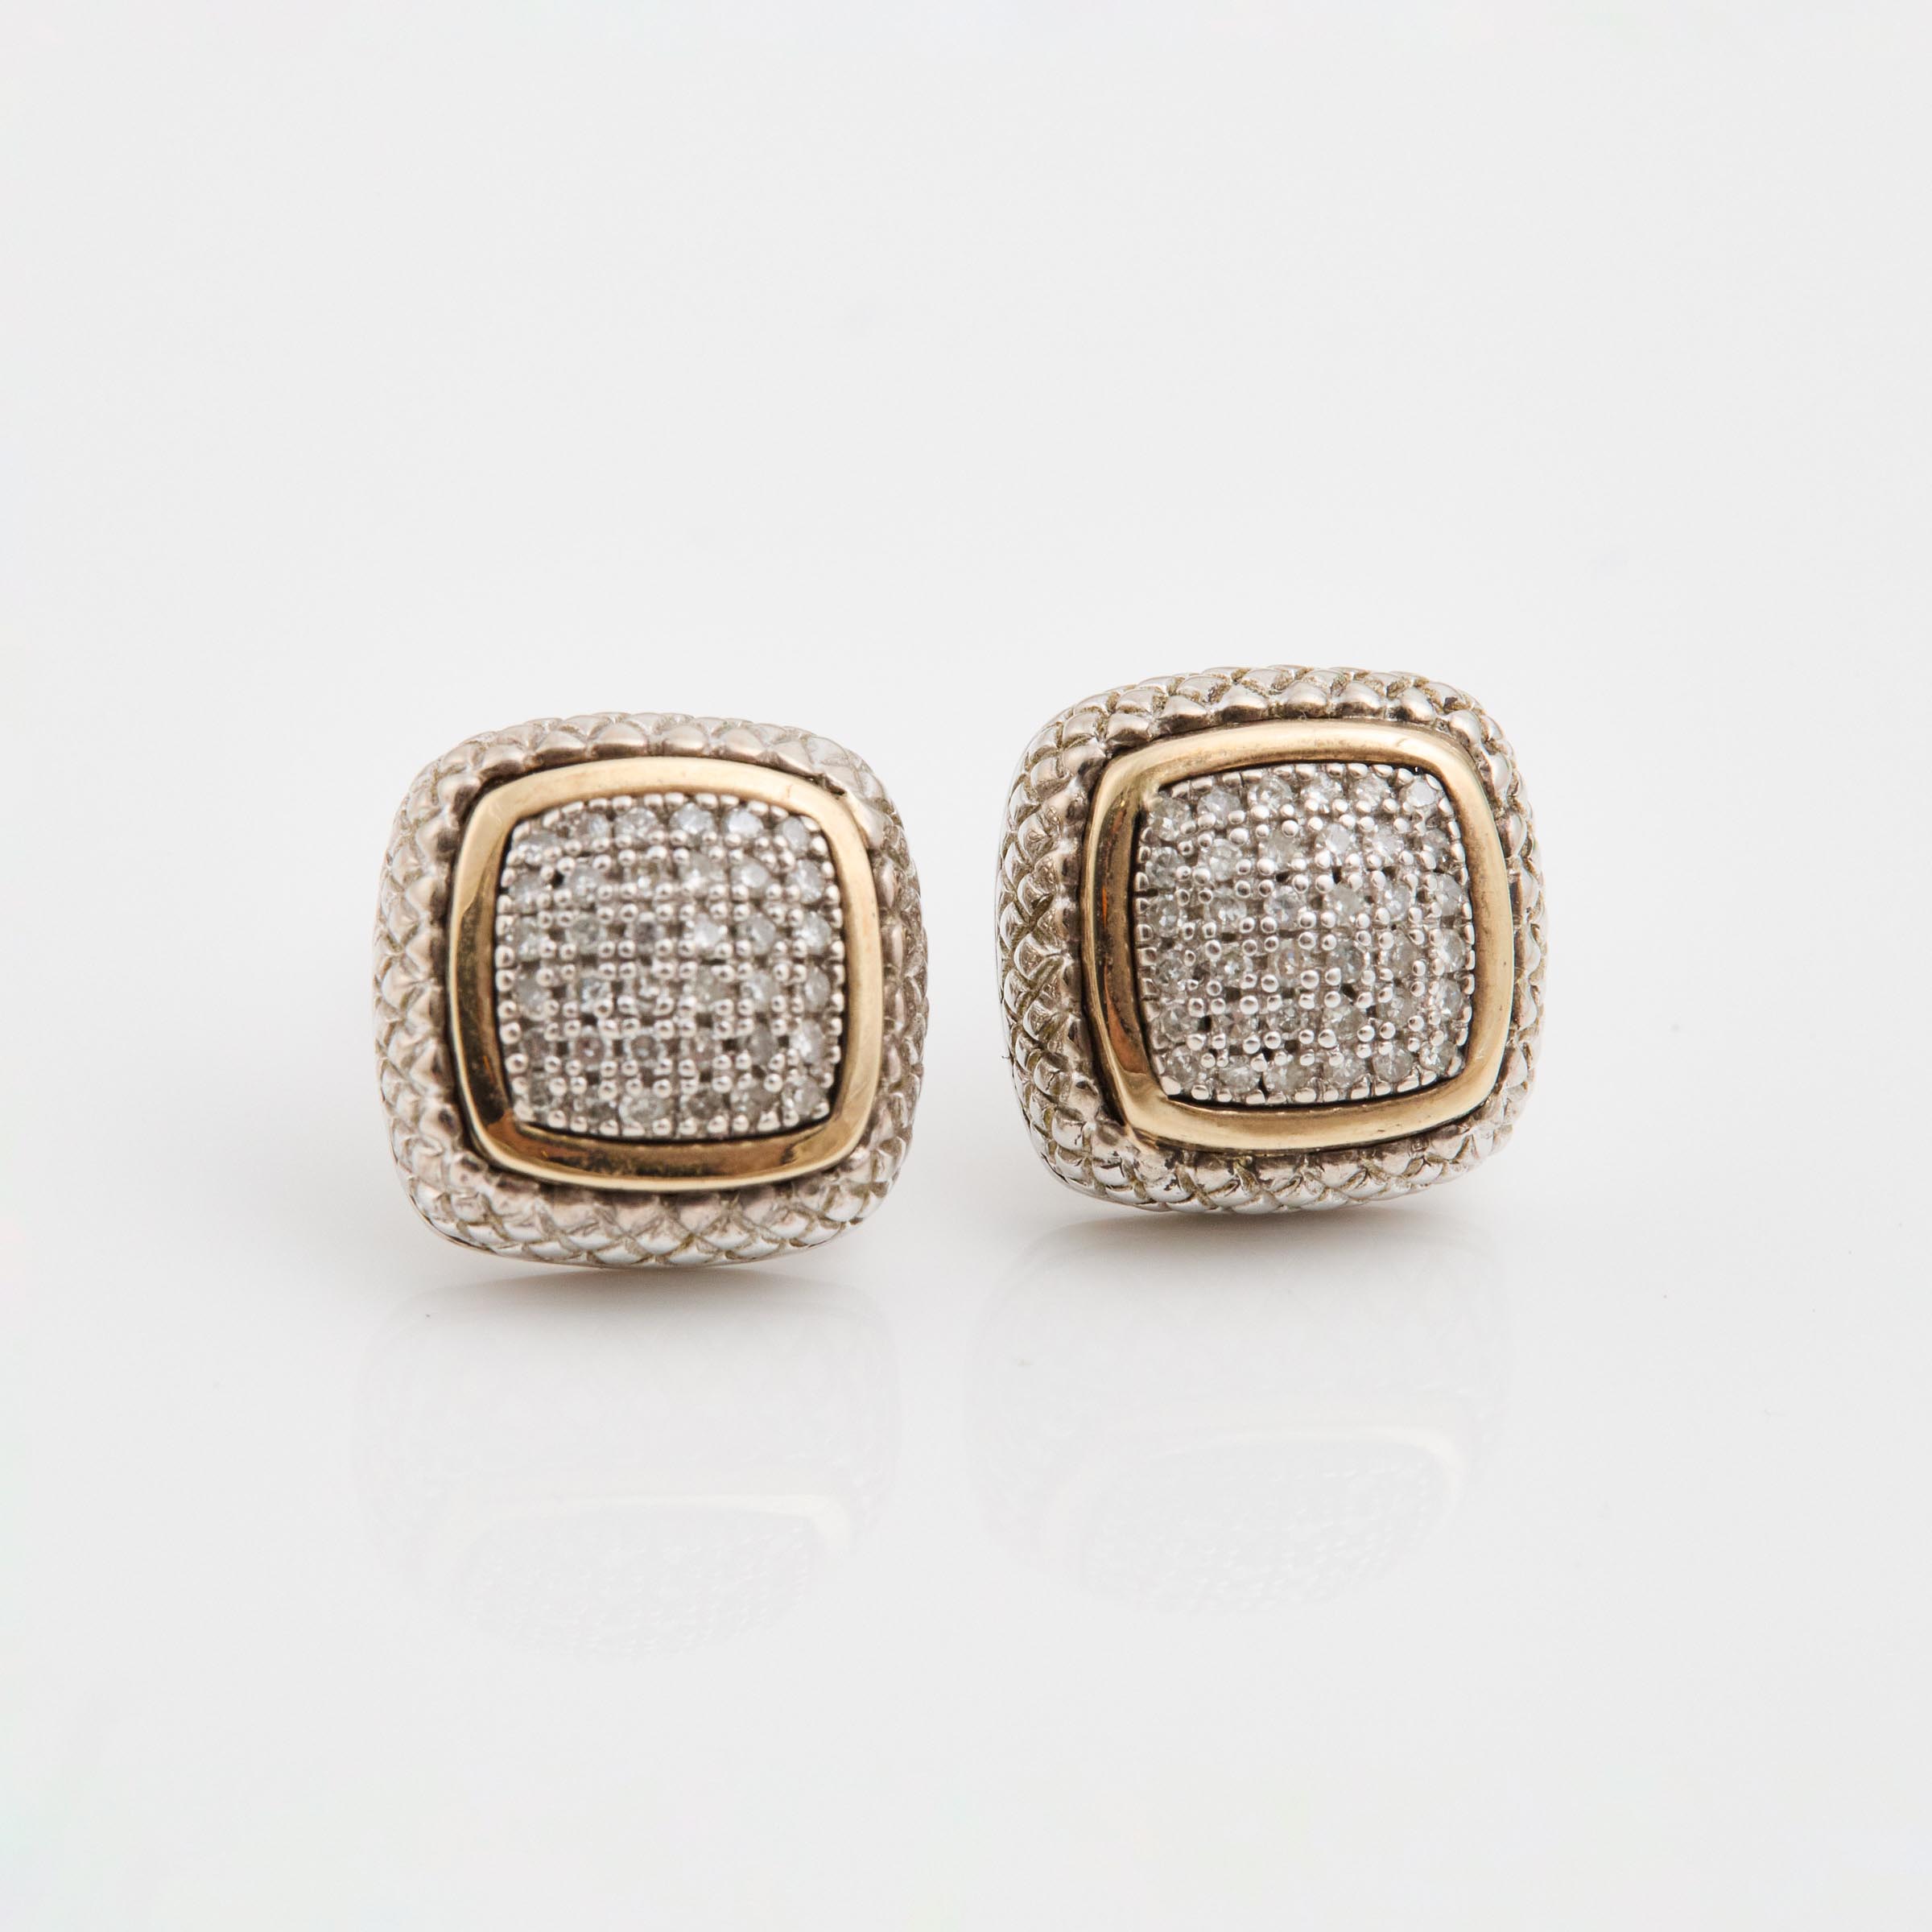 Pair Of 'Effy' Sterling Silver And Gold Earrings